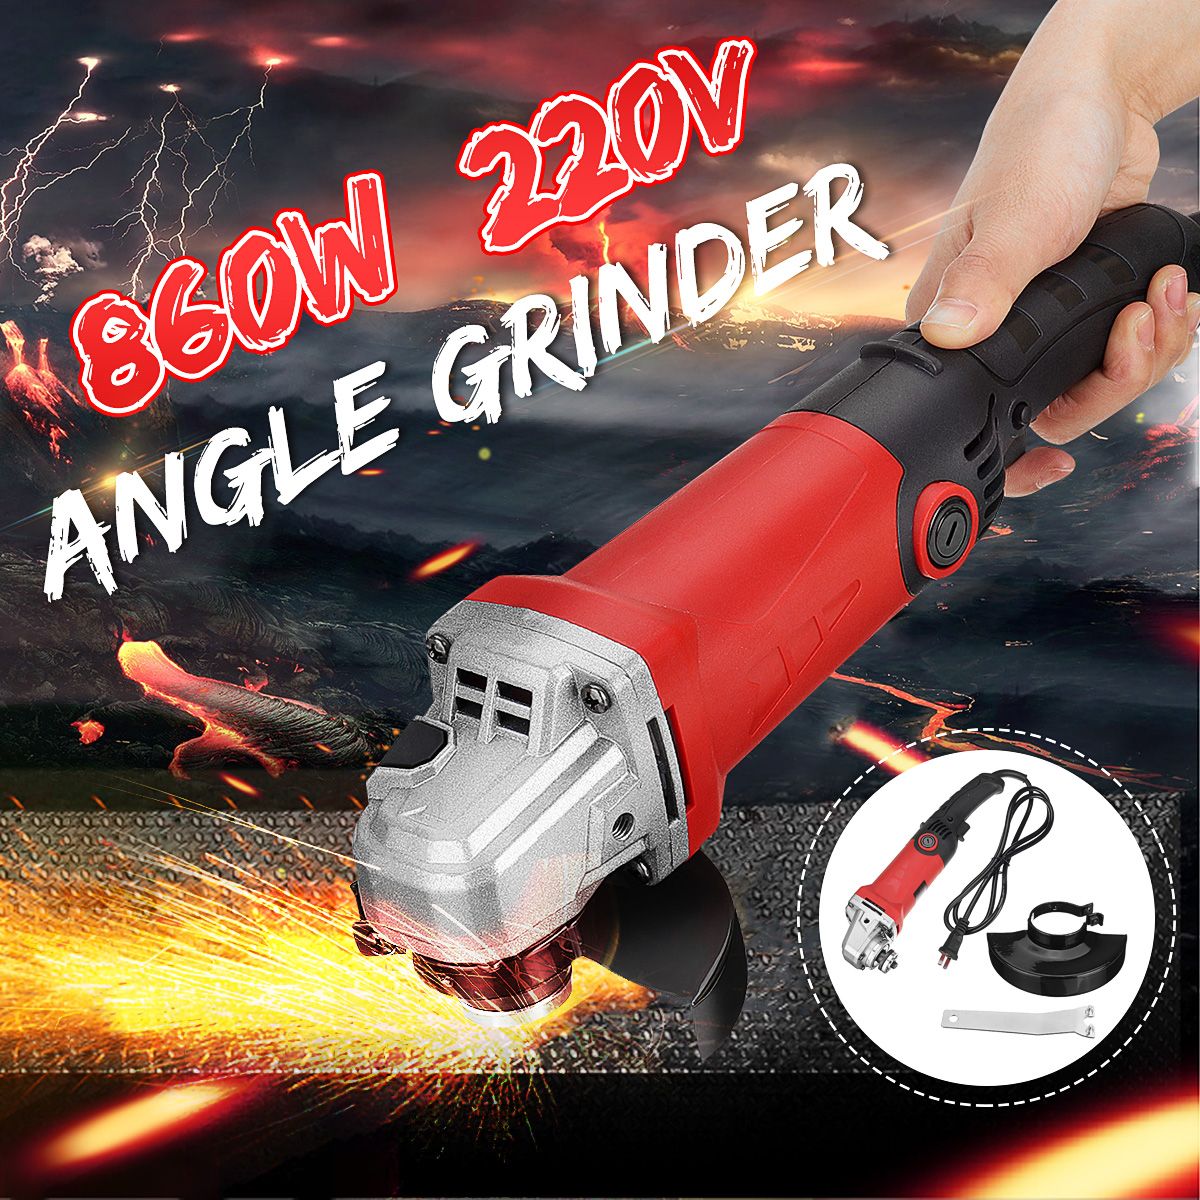 860W-Multi-purposed-Angle-Grinder-Household-Abrasive-Polisher-Cutting-Grinding-Tool-1700350